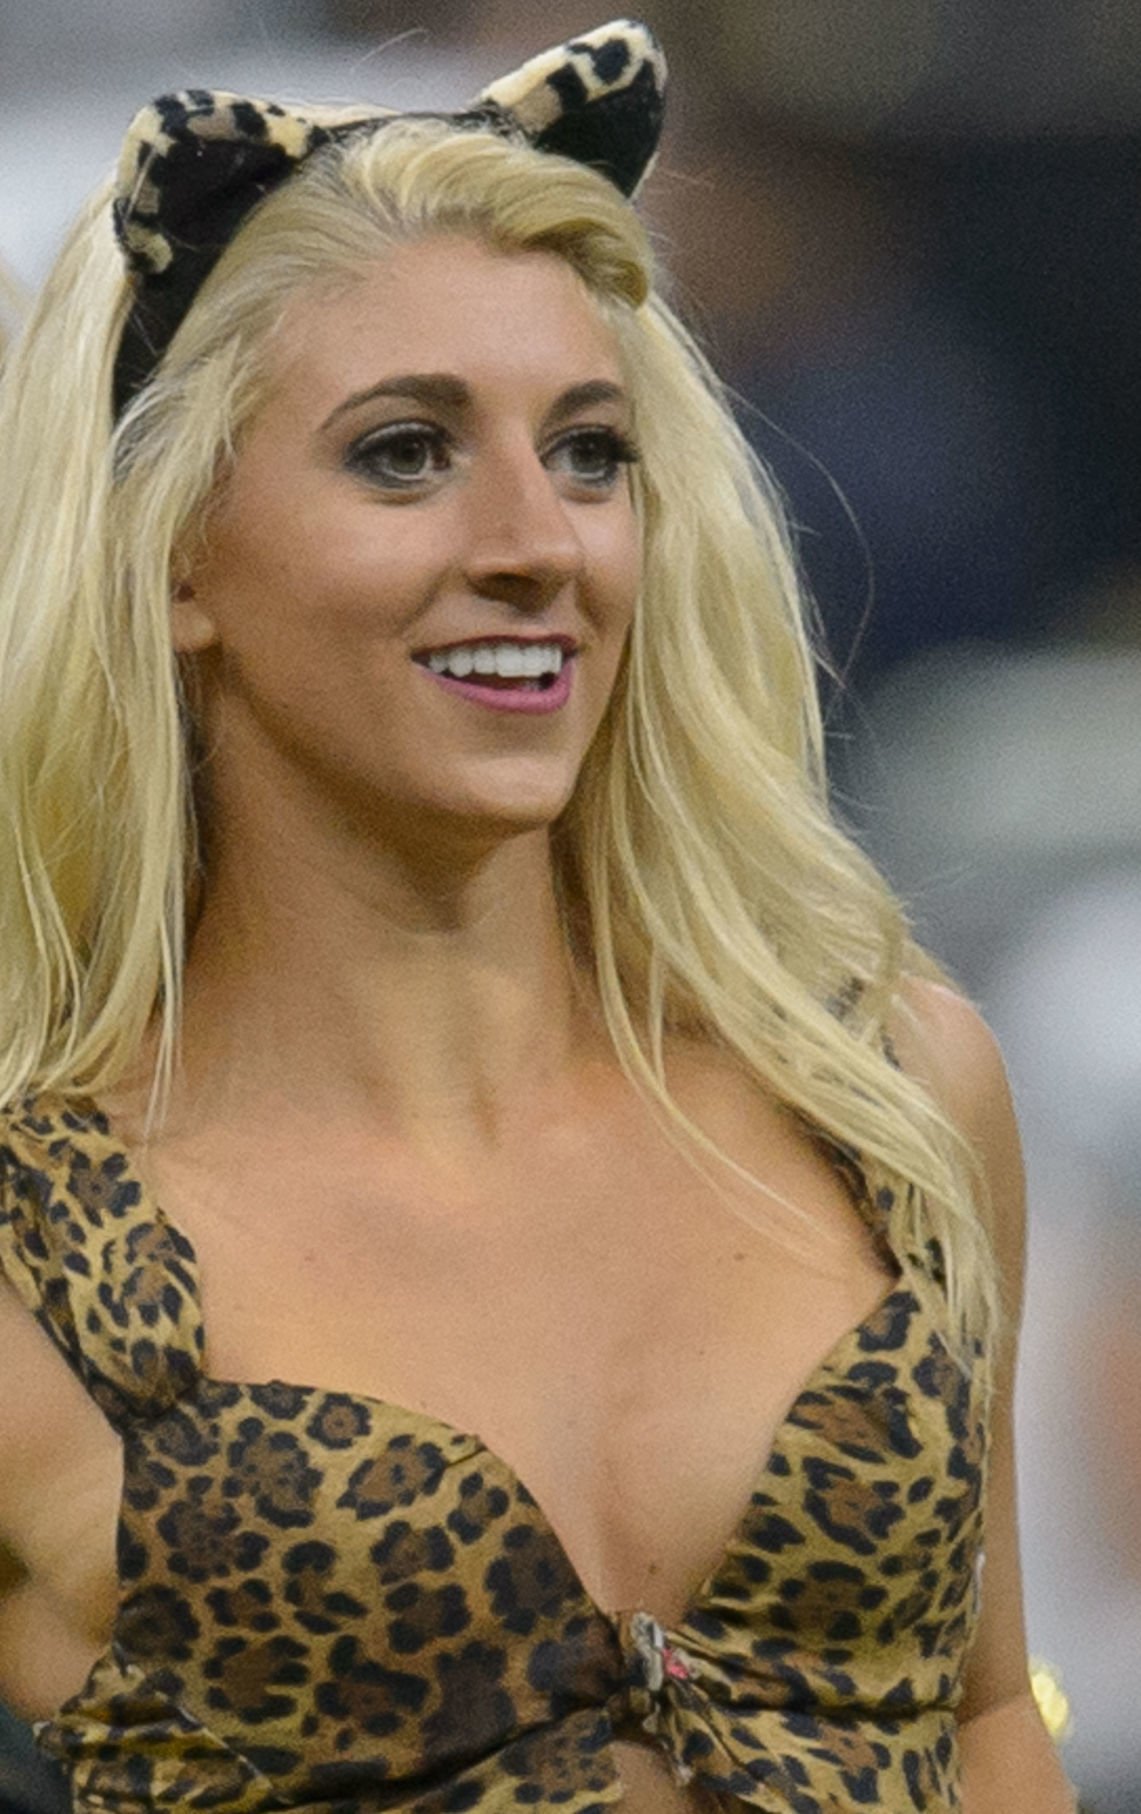 Nyt Former New Orleans Saints Cheerleader Claims Discriminatory Rules Led To Her Firing